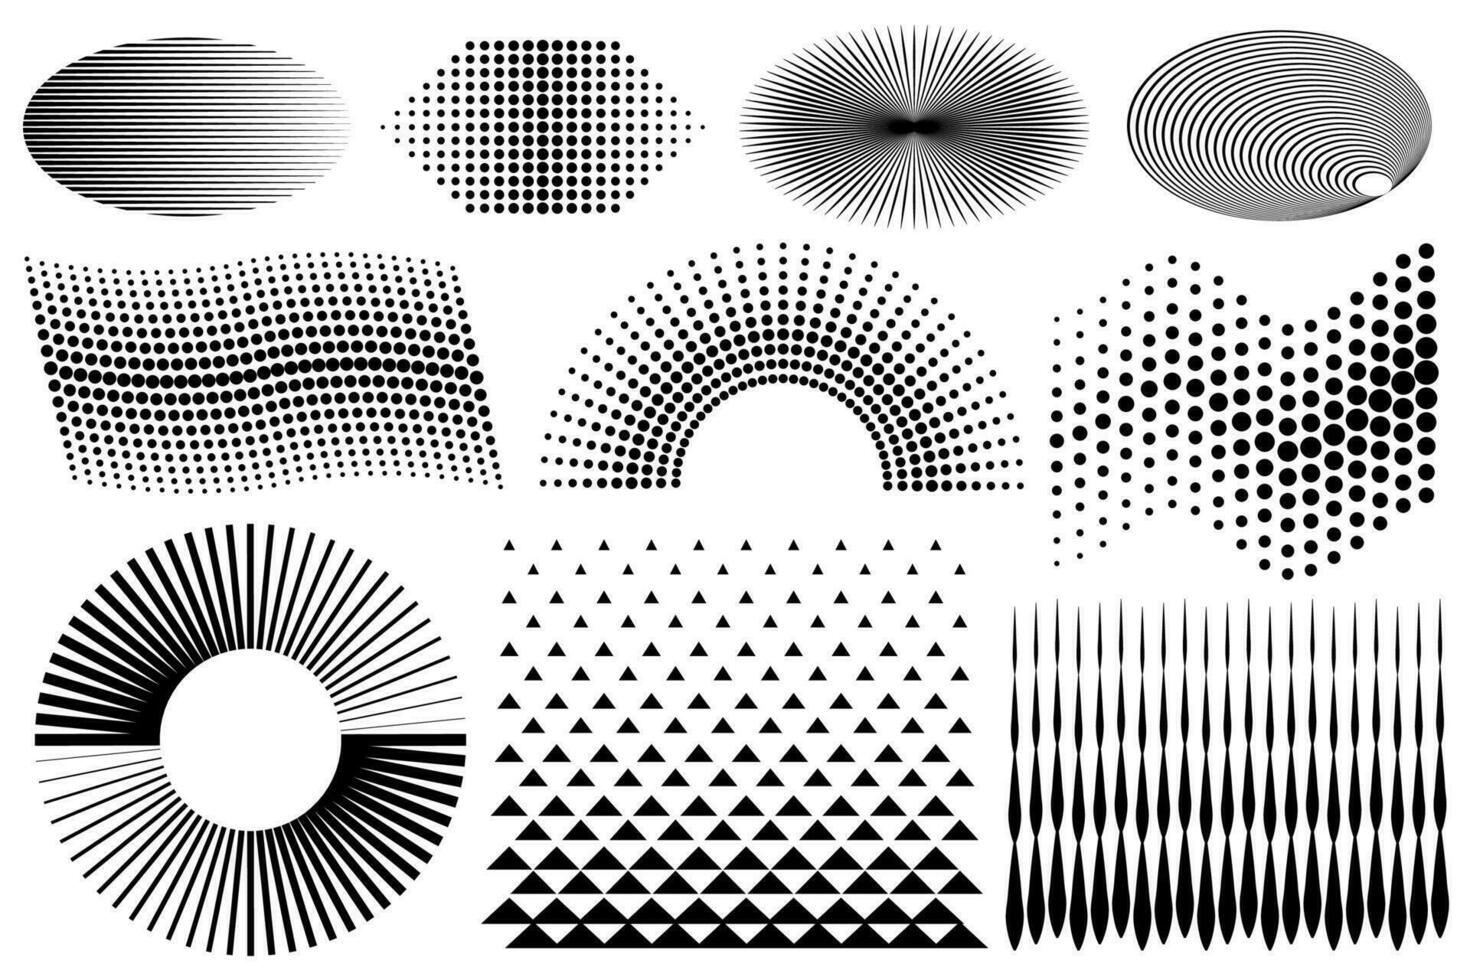 Abstract dotted halftone design elements. Black and white gradient spotted shapes for your design projects. vector